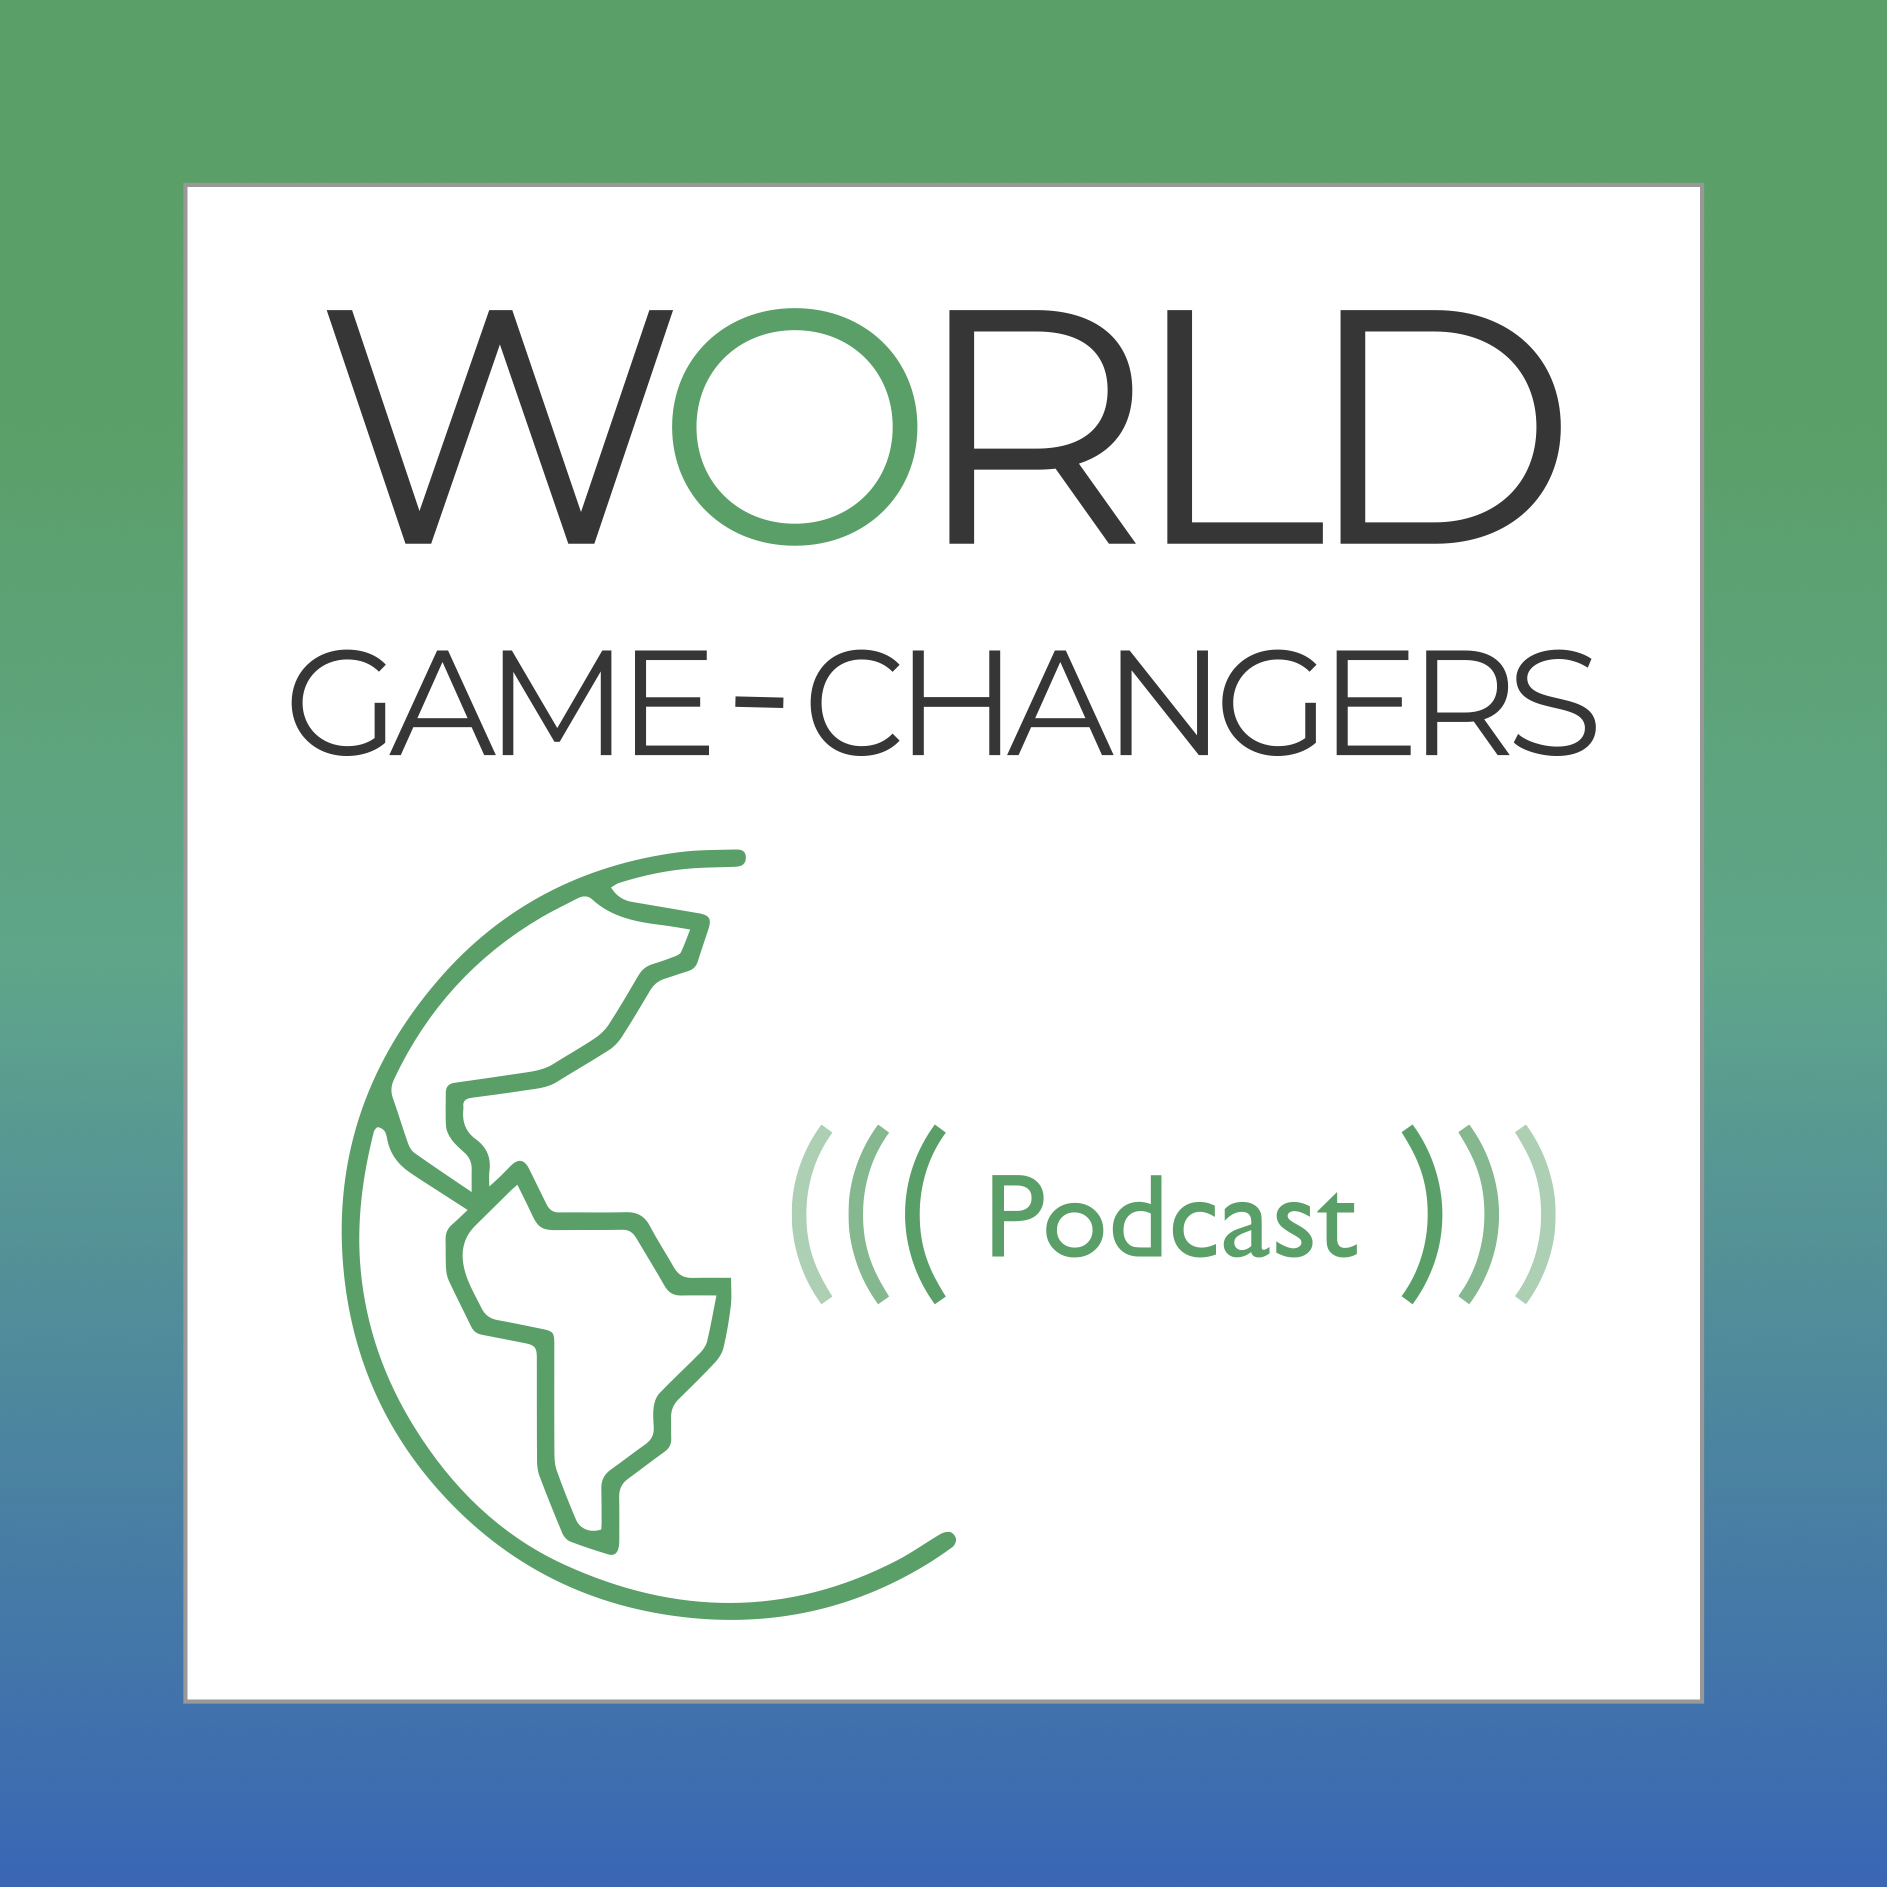 Young Game-Changers: What The World Needs Now - Paul D. Lowe & Cassie Mooney